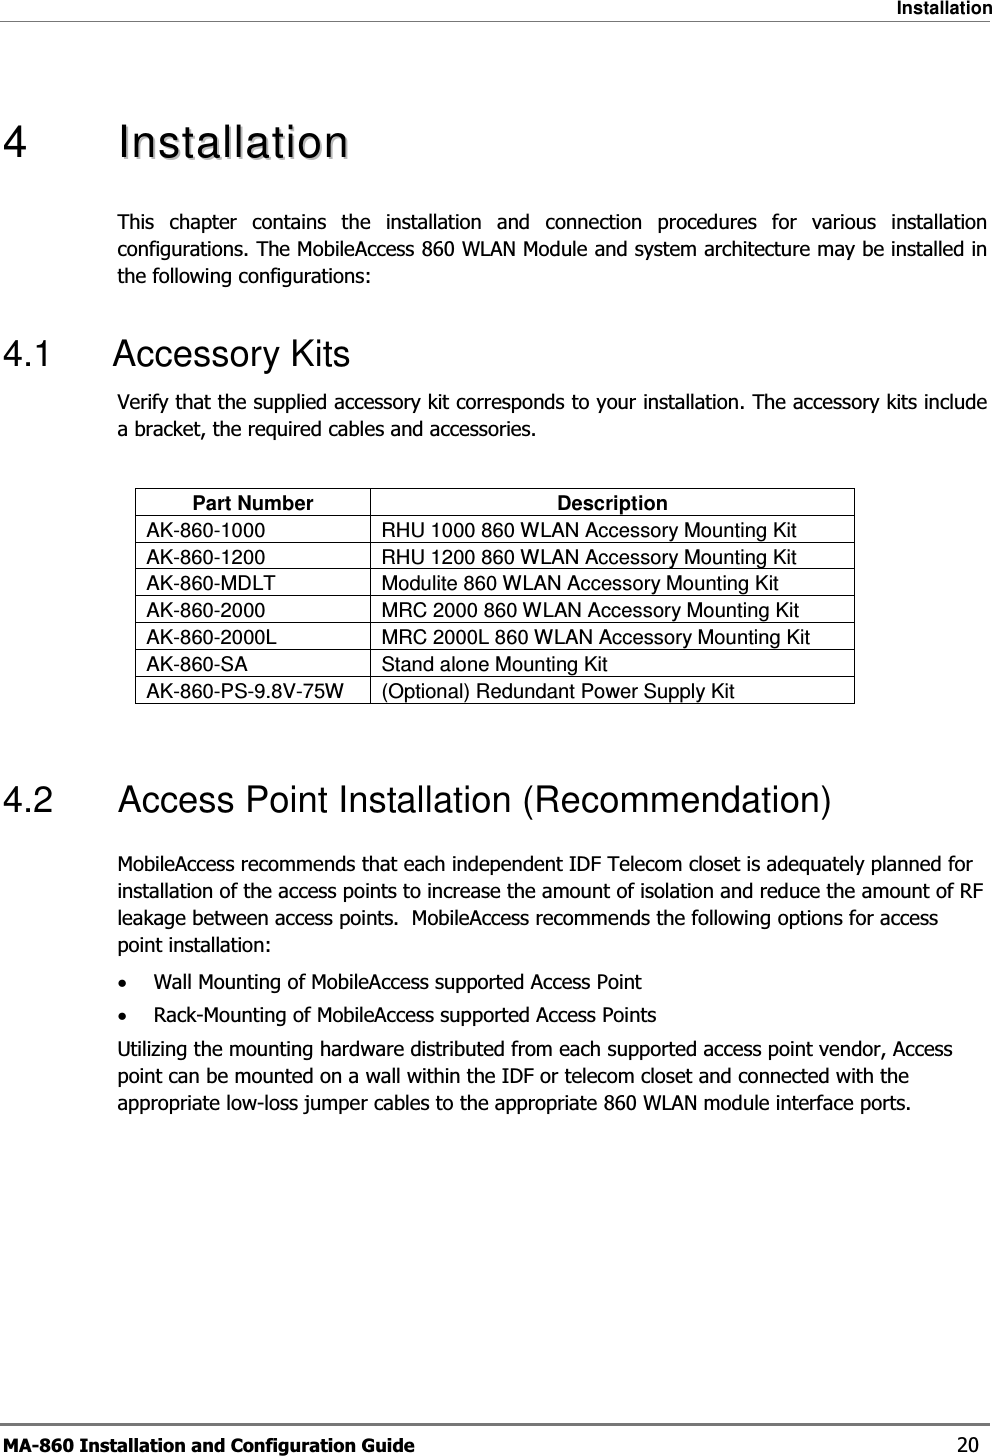 Installation MA-860 Installation and Configuration Guide    20  4   IInnssttaallllaattiioonnThis chapter contains the installation and connection procedures for various installation configurations. The MobileAccess 860 WLAN Module and system architecture may be installed in the following configurations: 4.1 Accessory Kits Verify that the supplied accessory kit corresponds to your installation. The accessory kits include a bracket, the required cables and accessories.  Part Number  Description AK-860-1000  RHU 1000 860 WLAN Accessory Mounting Kit  AK-860-1200  RHU 1200 860 WLAN Accessory Mounting Kit  AK-860-MDLT  Modulite 860 WLAN Accessory Mounting Kit  AK-860-2000  MRC 2000 860 WLAN Accessory Mounting Kit  AK-860-2000L  MRC 2000L 860 WLAN Accessory Mounting Kit AK-860-SA  Stand alone Mounting Kit  AK-860-PS-9.8V-75W  (Optional) Redundant Power Supply Kit  4.2  Access Point Installation (Recommendation) MobileAccess recommends that each independent IDF Telecom closet is adequately planned for installation of the access points to increase the amount of isolation and reduce the amount of RF leakage between access points.  MobileAccess recommends the following options for access point installation: •Wall Mounting of MobileAccess supported Access Point •Rack-Mounting of MobileAccess supported Access Points Utilizing the mounting hardware distributed from each supported access point vendor, Access point can be mounted on a wall within the IDF or telecom closet and connected with the appropriate low-loss jumper cables to the appropriate 860 WLAN module interface ports. 